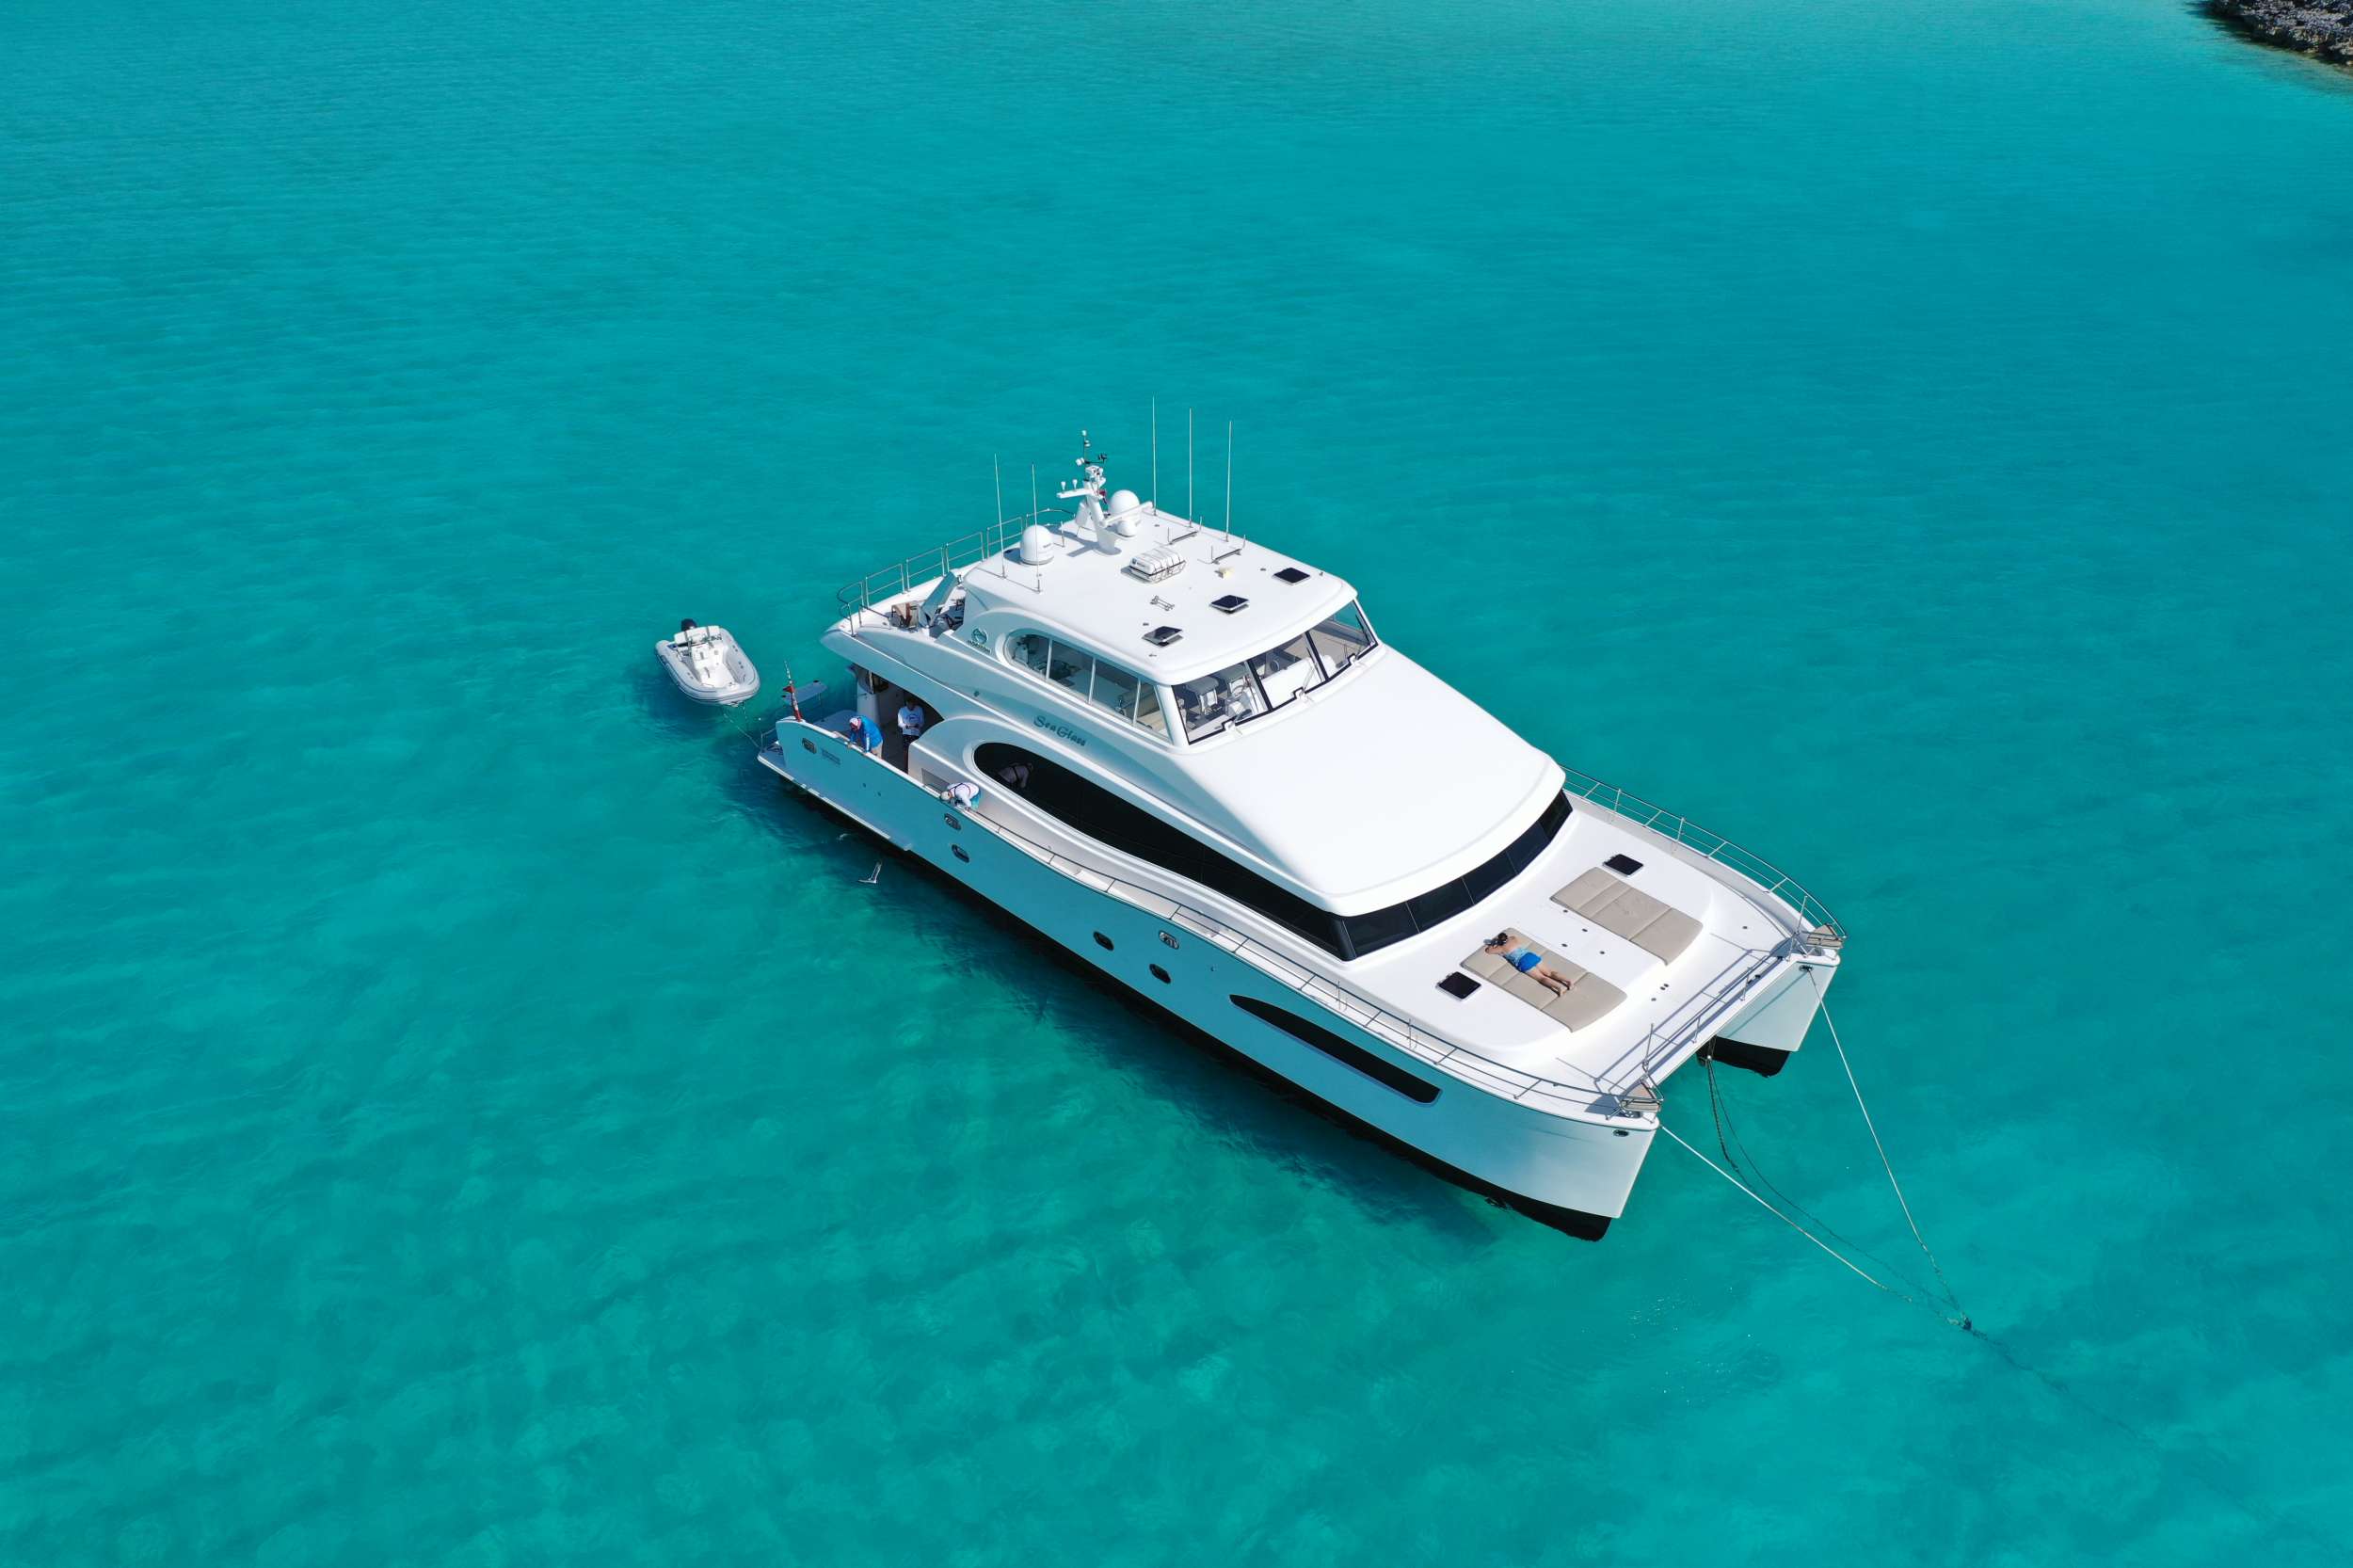 SEAGLASS 74 Yacht Charter - Ritzy Charters